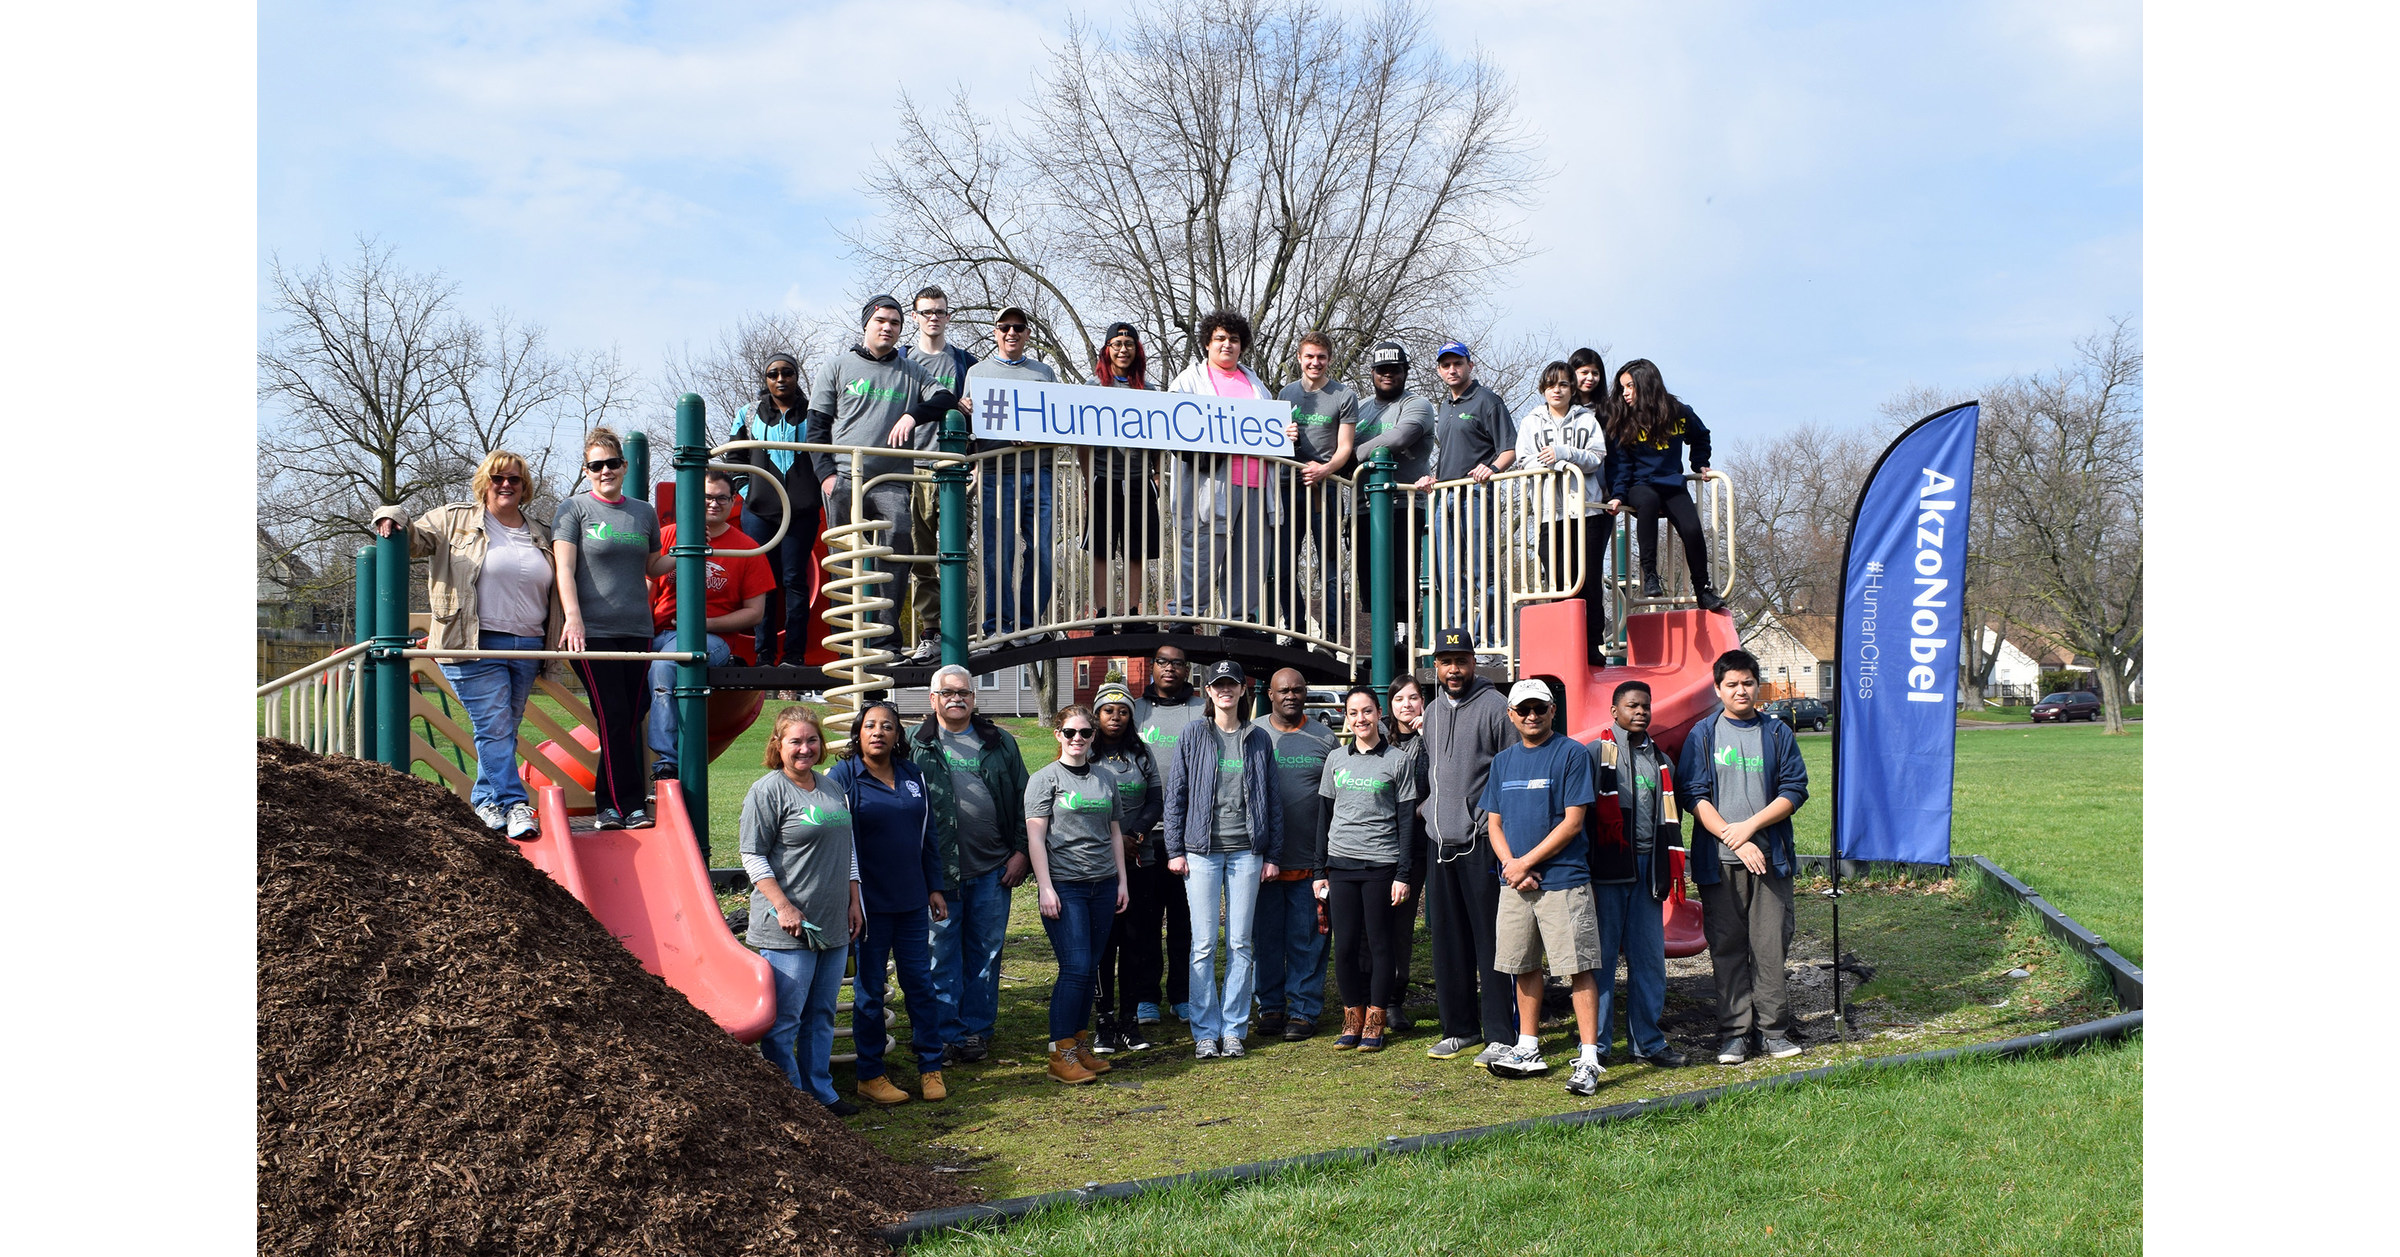 Pontiac residents to benefit from parks improvement program launched by ...